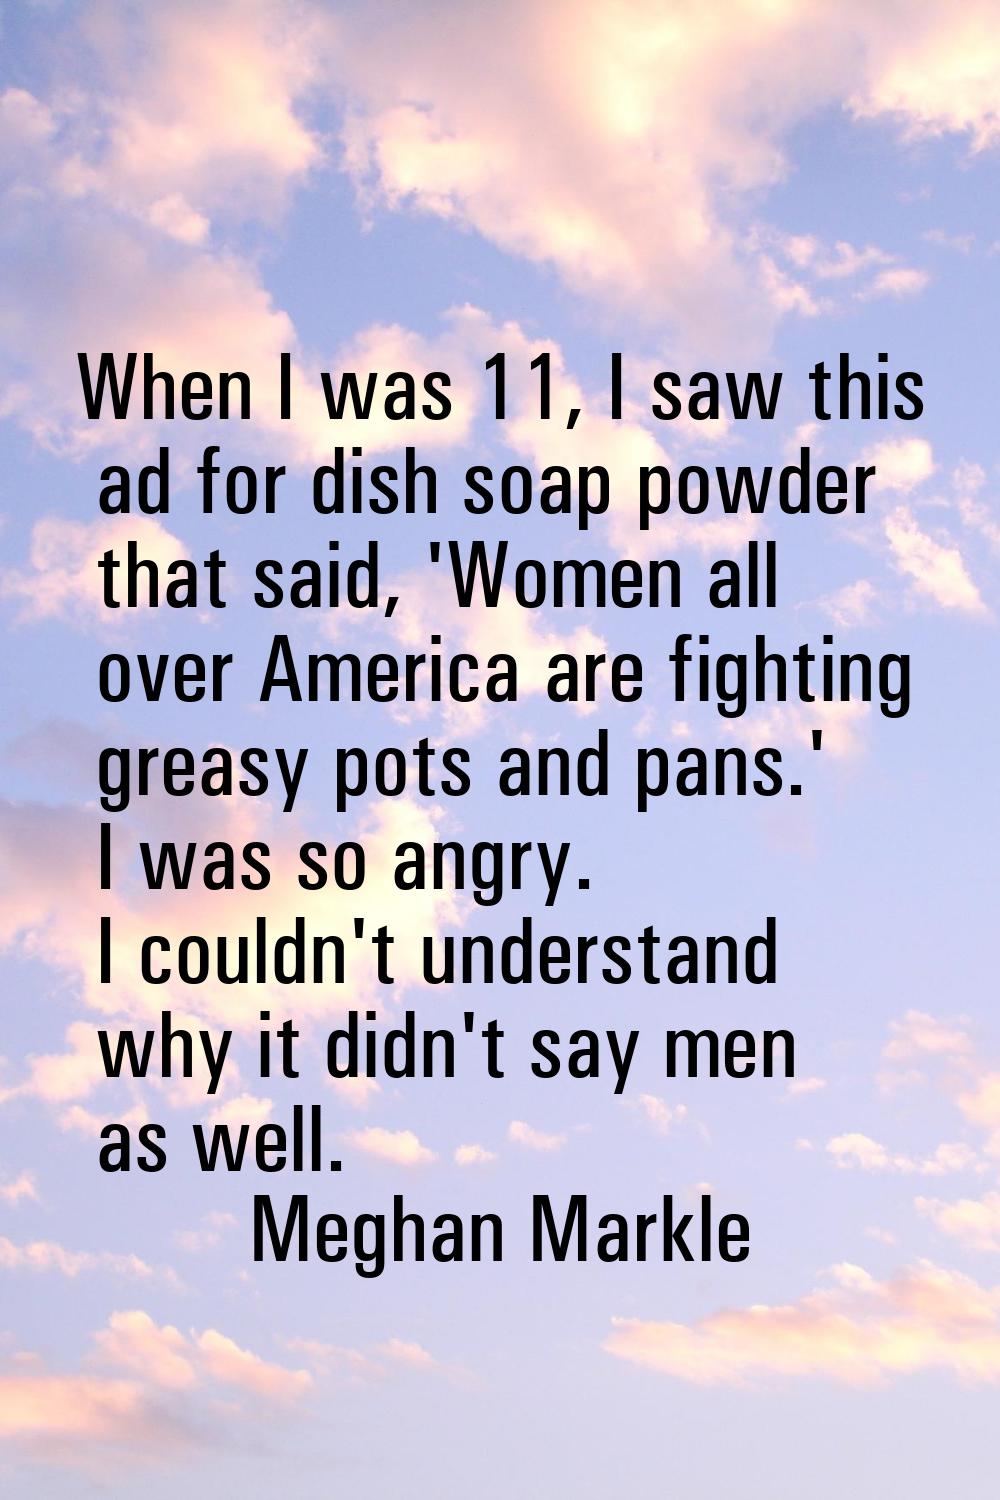 When I was 11, I saw this ad for dish soap powder that said, 'Women all over America are fighting g